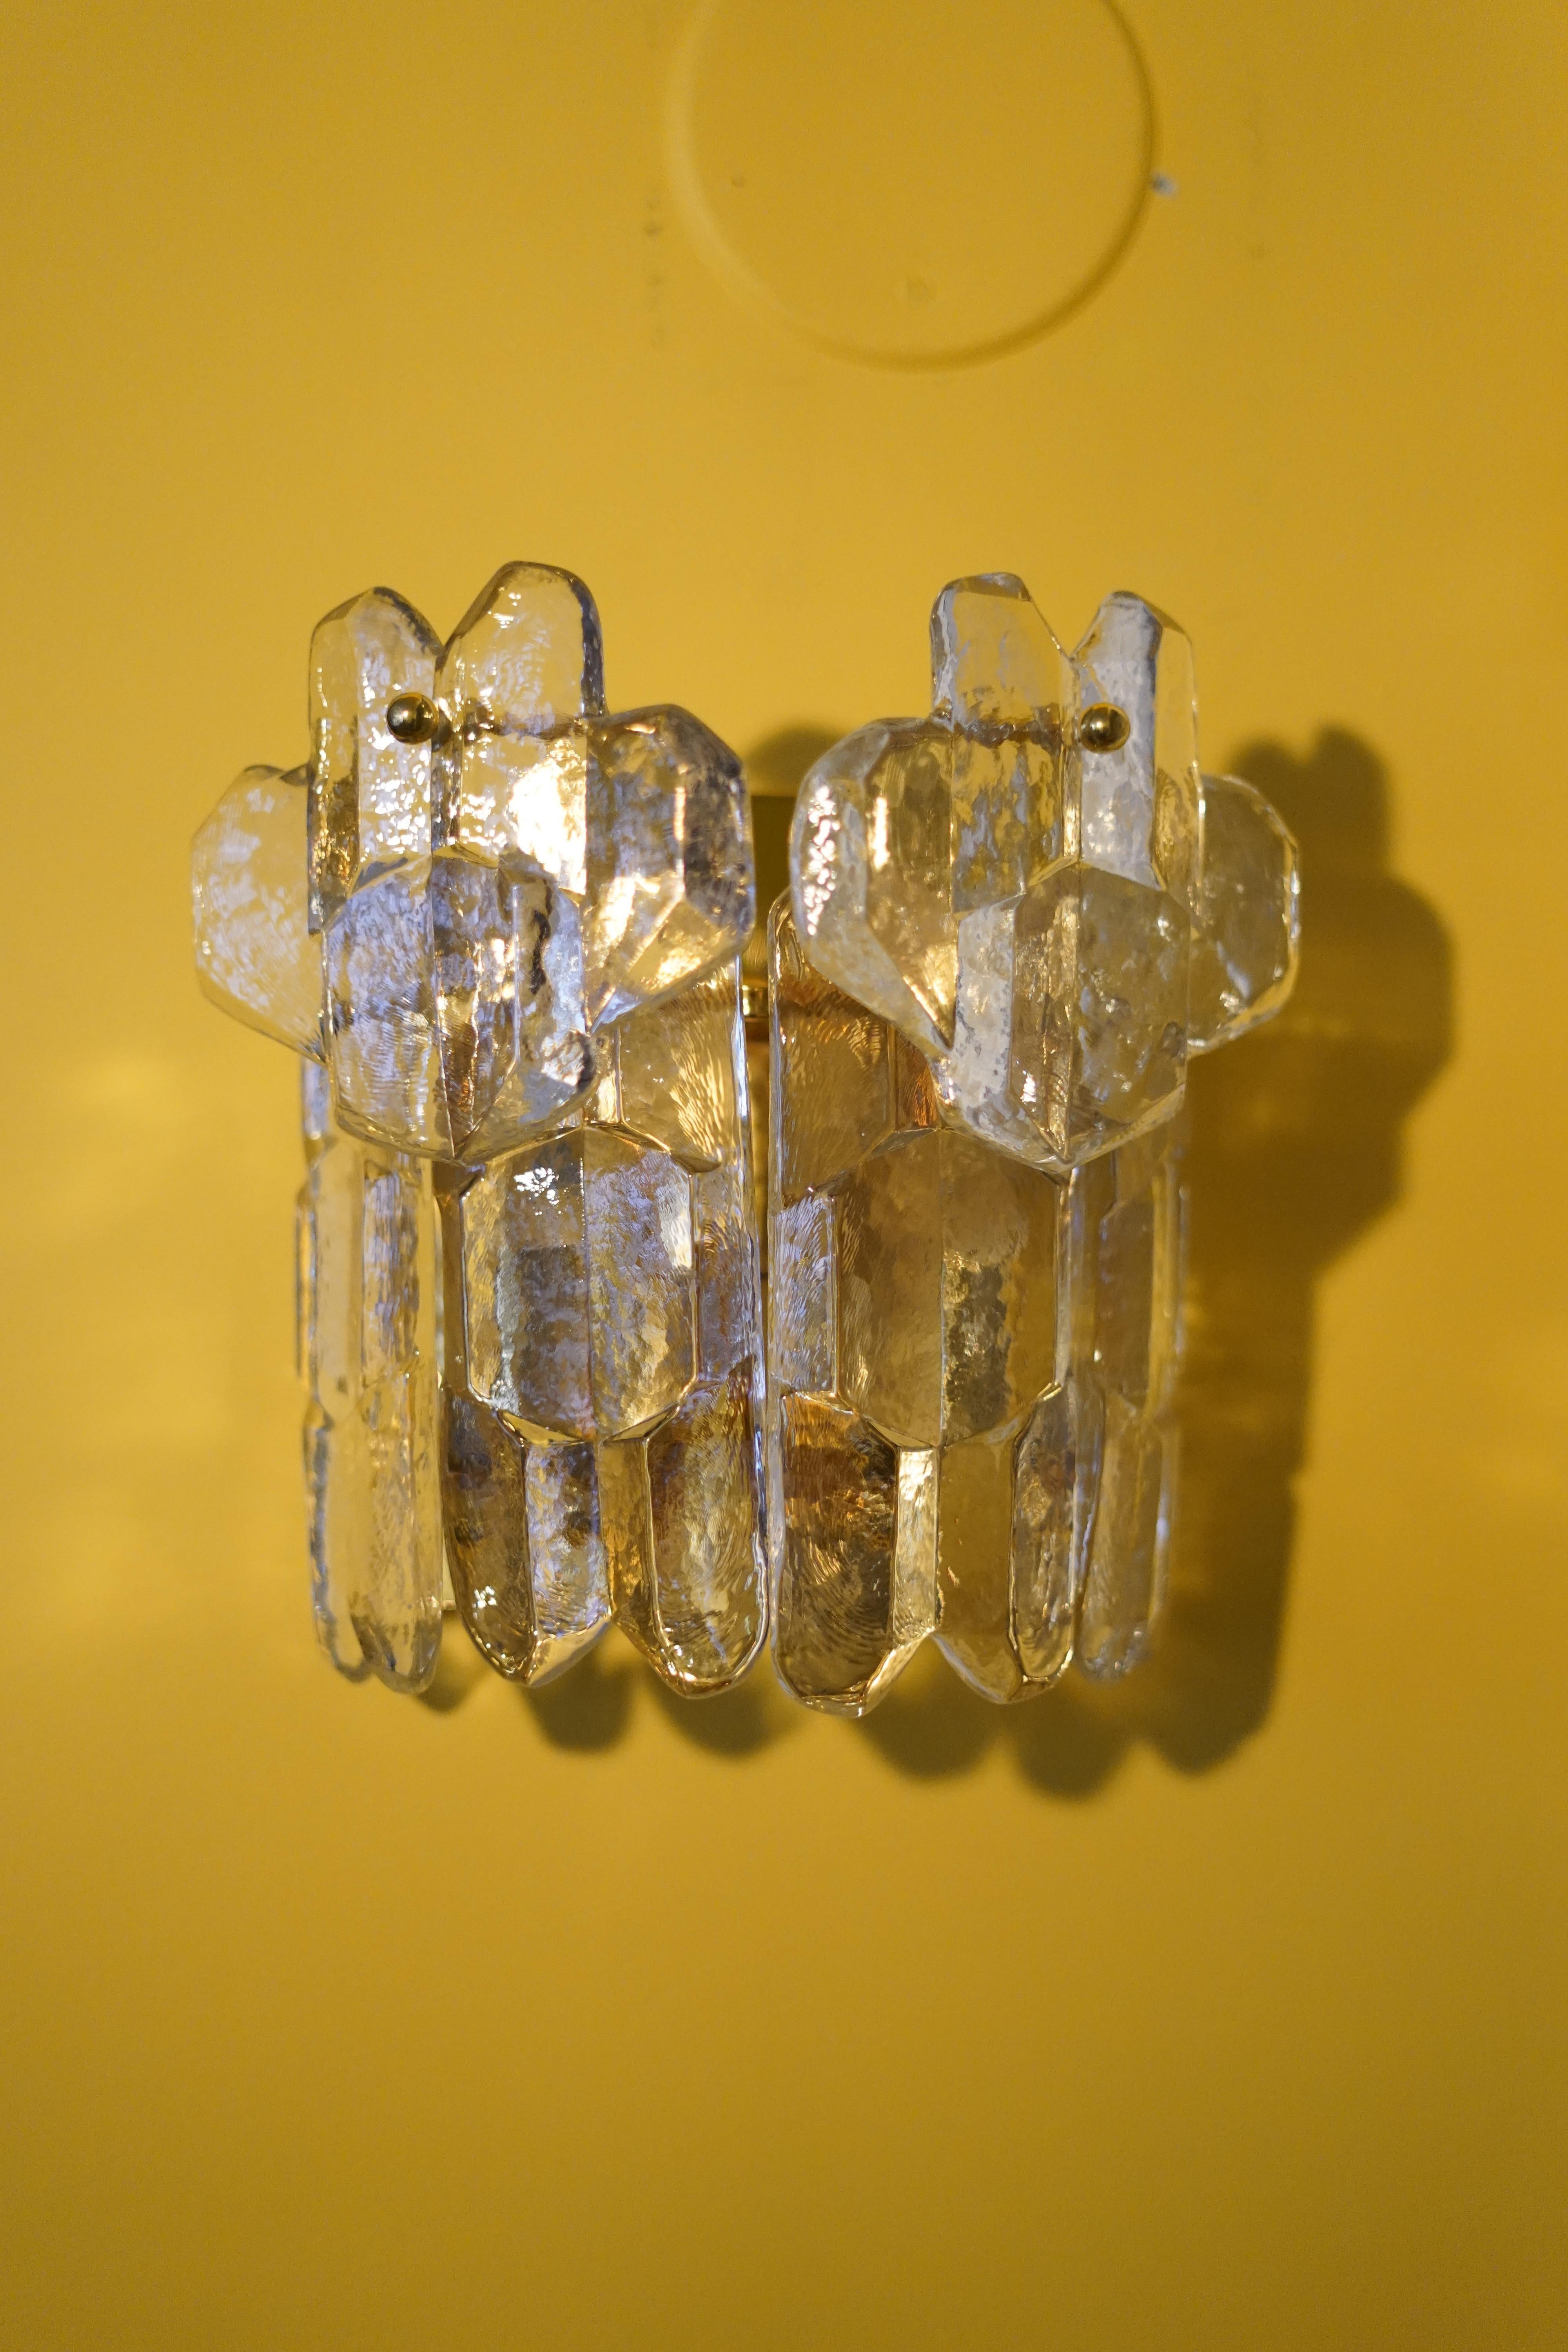 Pair Kalmar palazzo crystal sconces 1970s Vienna Austria, four thick clear elongated heavy pieces of highest quality press crystal mounted on a gilt frame with two single upper pieces mounted above the lower row of crystal glass all works as a shade